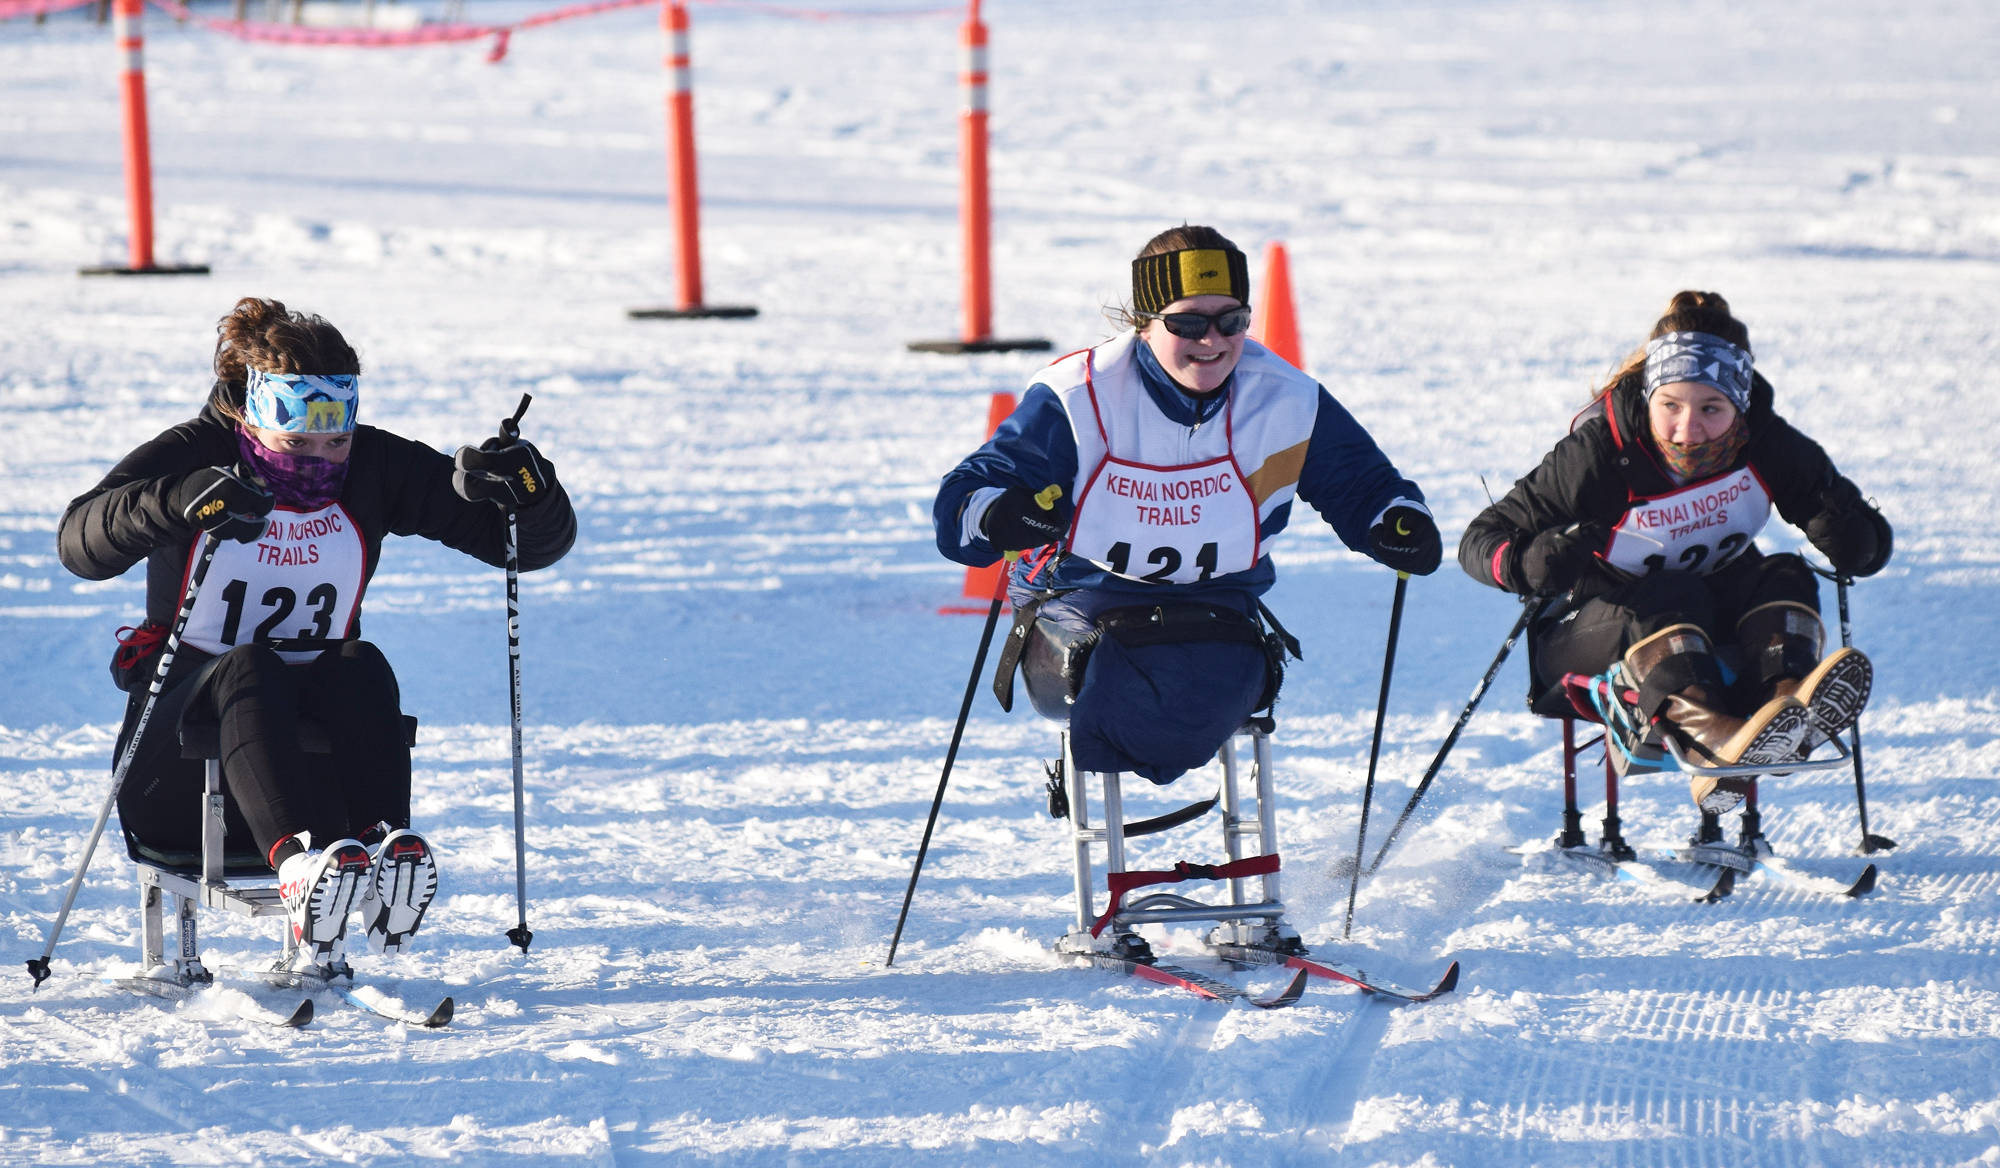 Angelica Haakenson (middle) takes off with a group of competitors Friday afternoon in the Kenai Klassic races at the Tsalteshi Trails in Soldotna. (Photo by Joey Klecka/Peninsula Clarion)